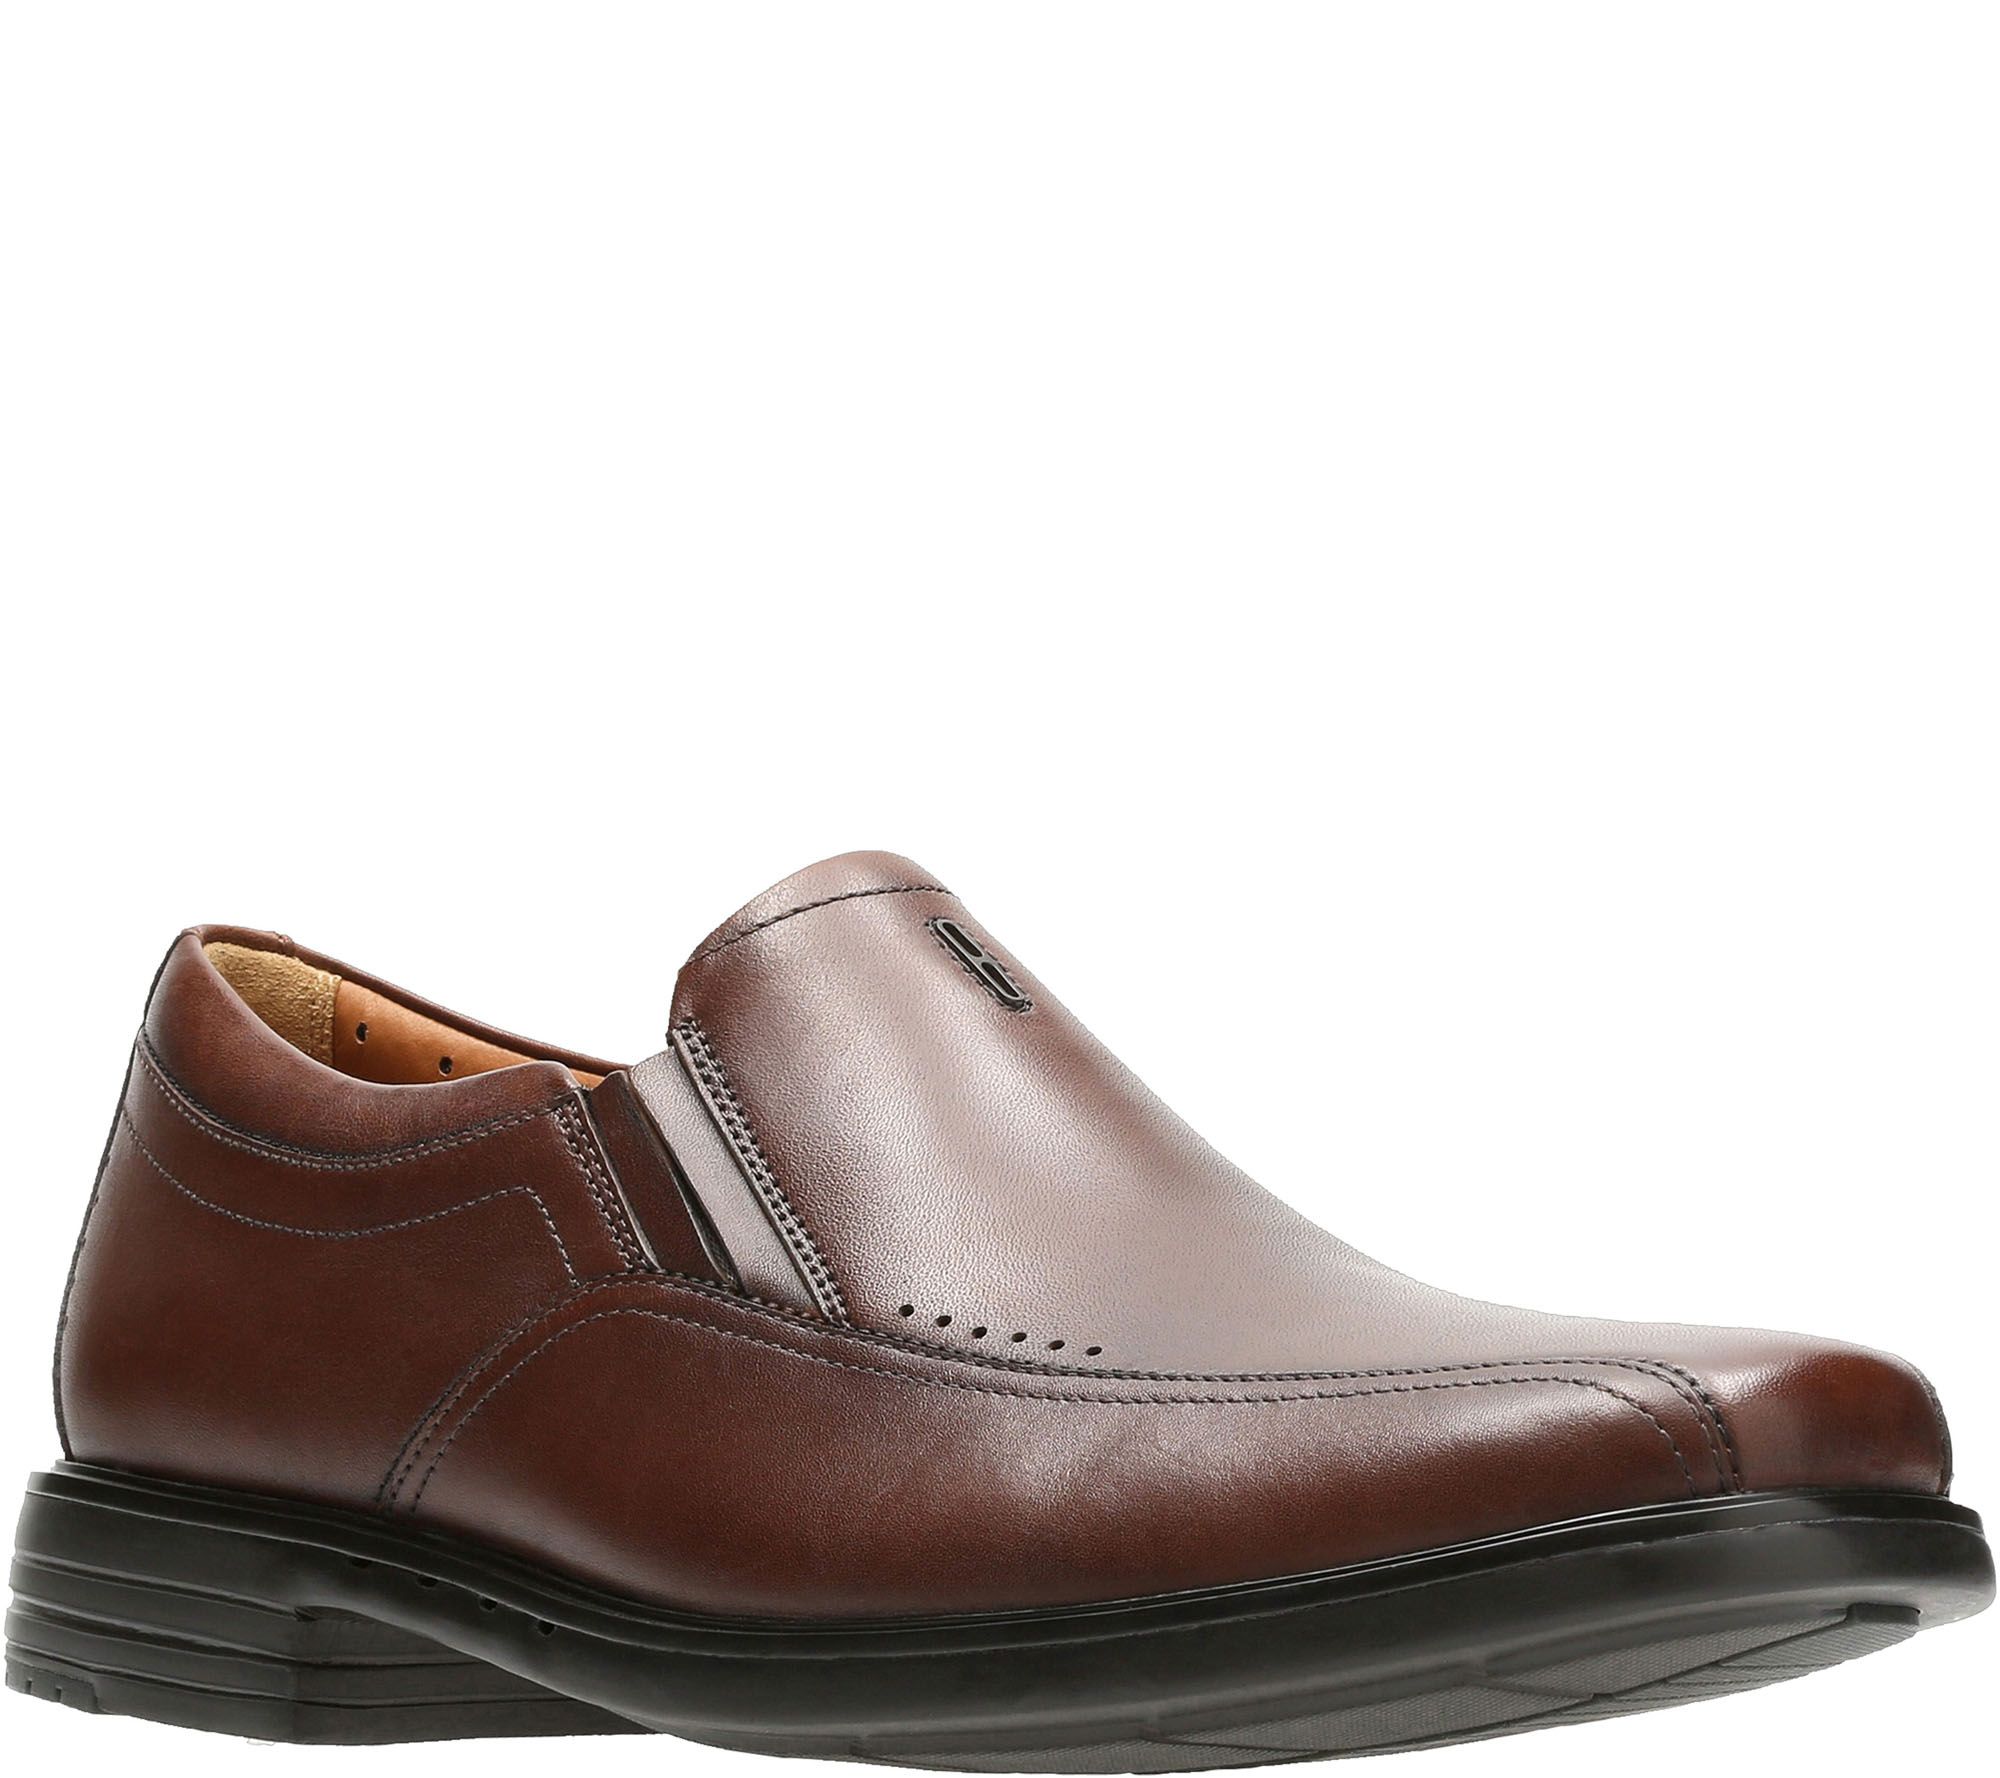 Clarks Men's Unstructured Leather 